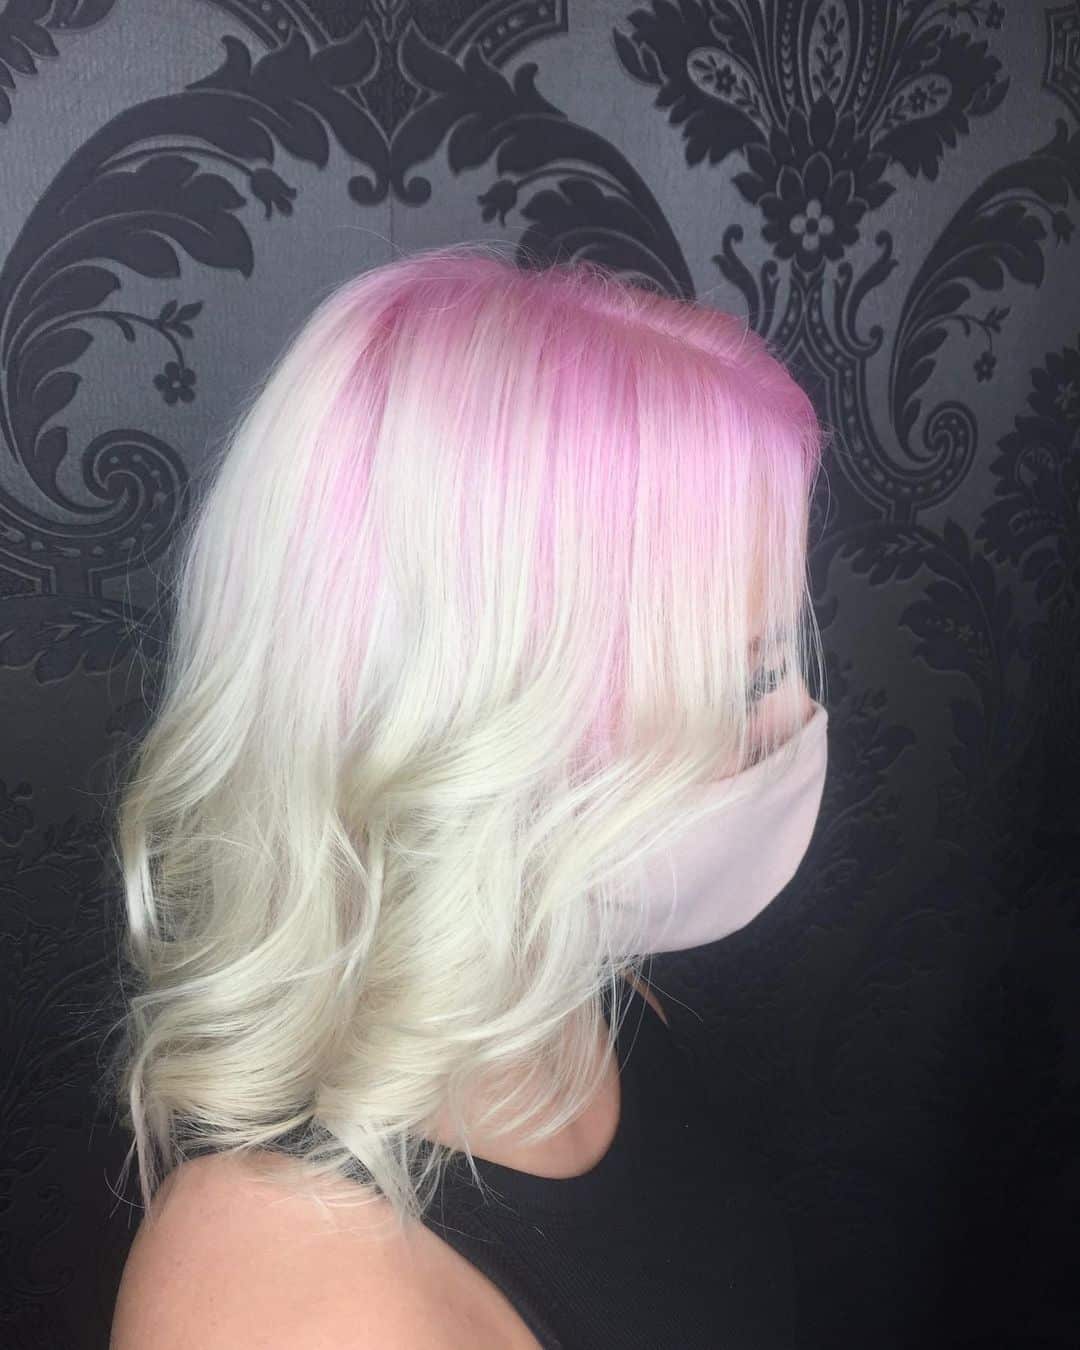 40. Iced Pink Shadow Roots With Platinum Blonde Hair.